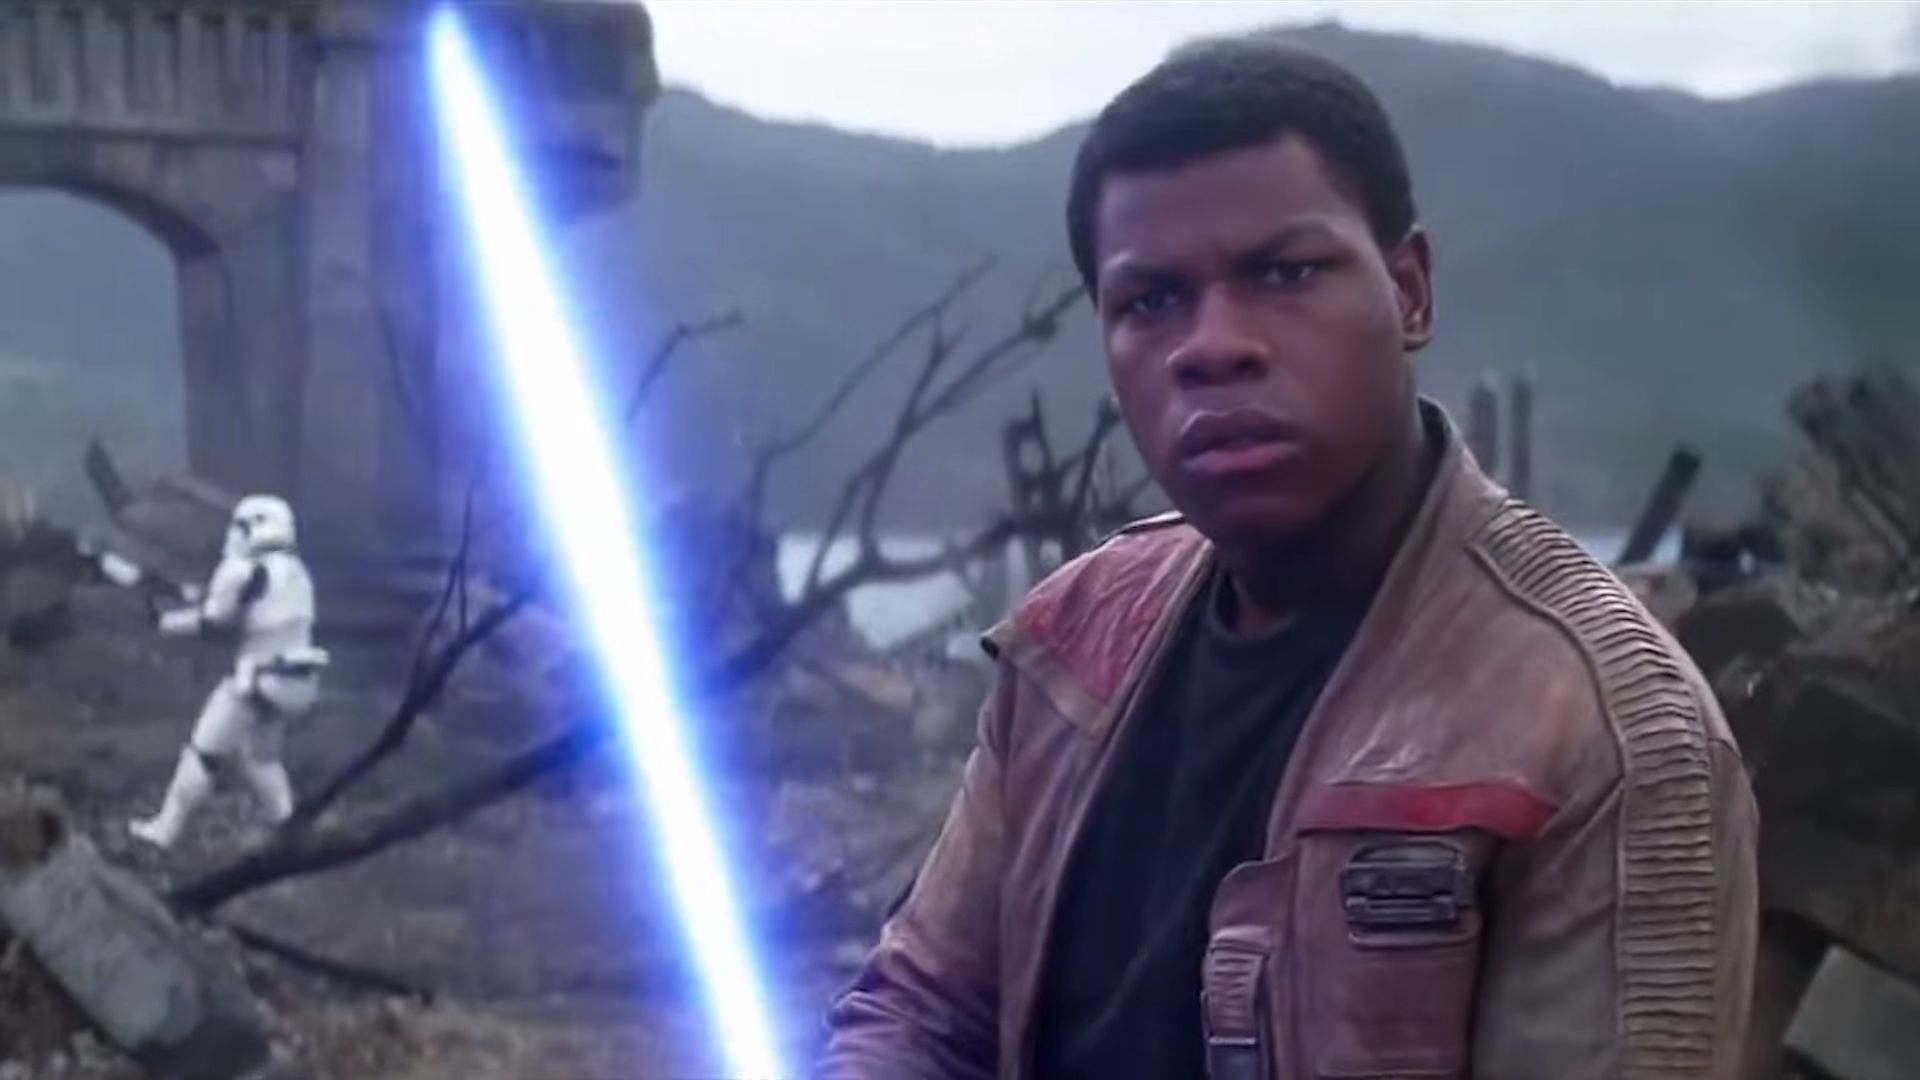 What is Finn’s stormtrooper number?